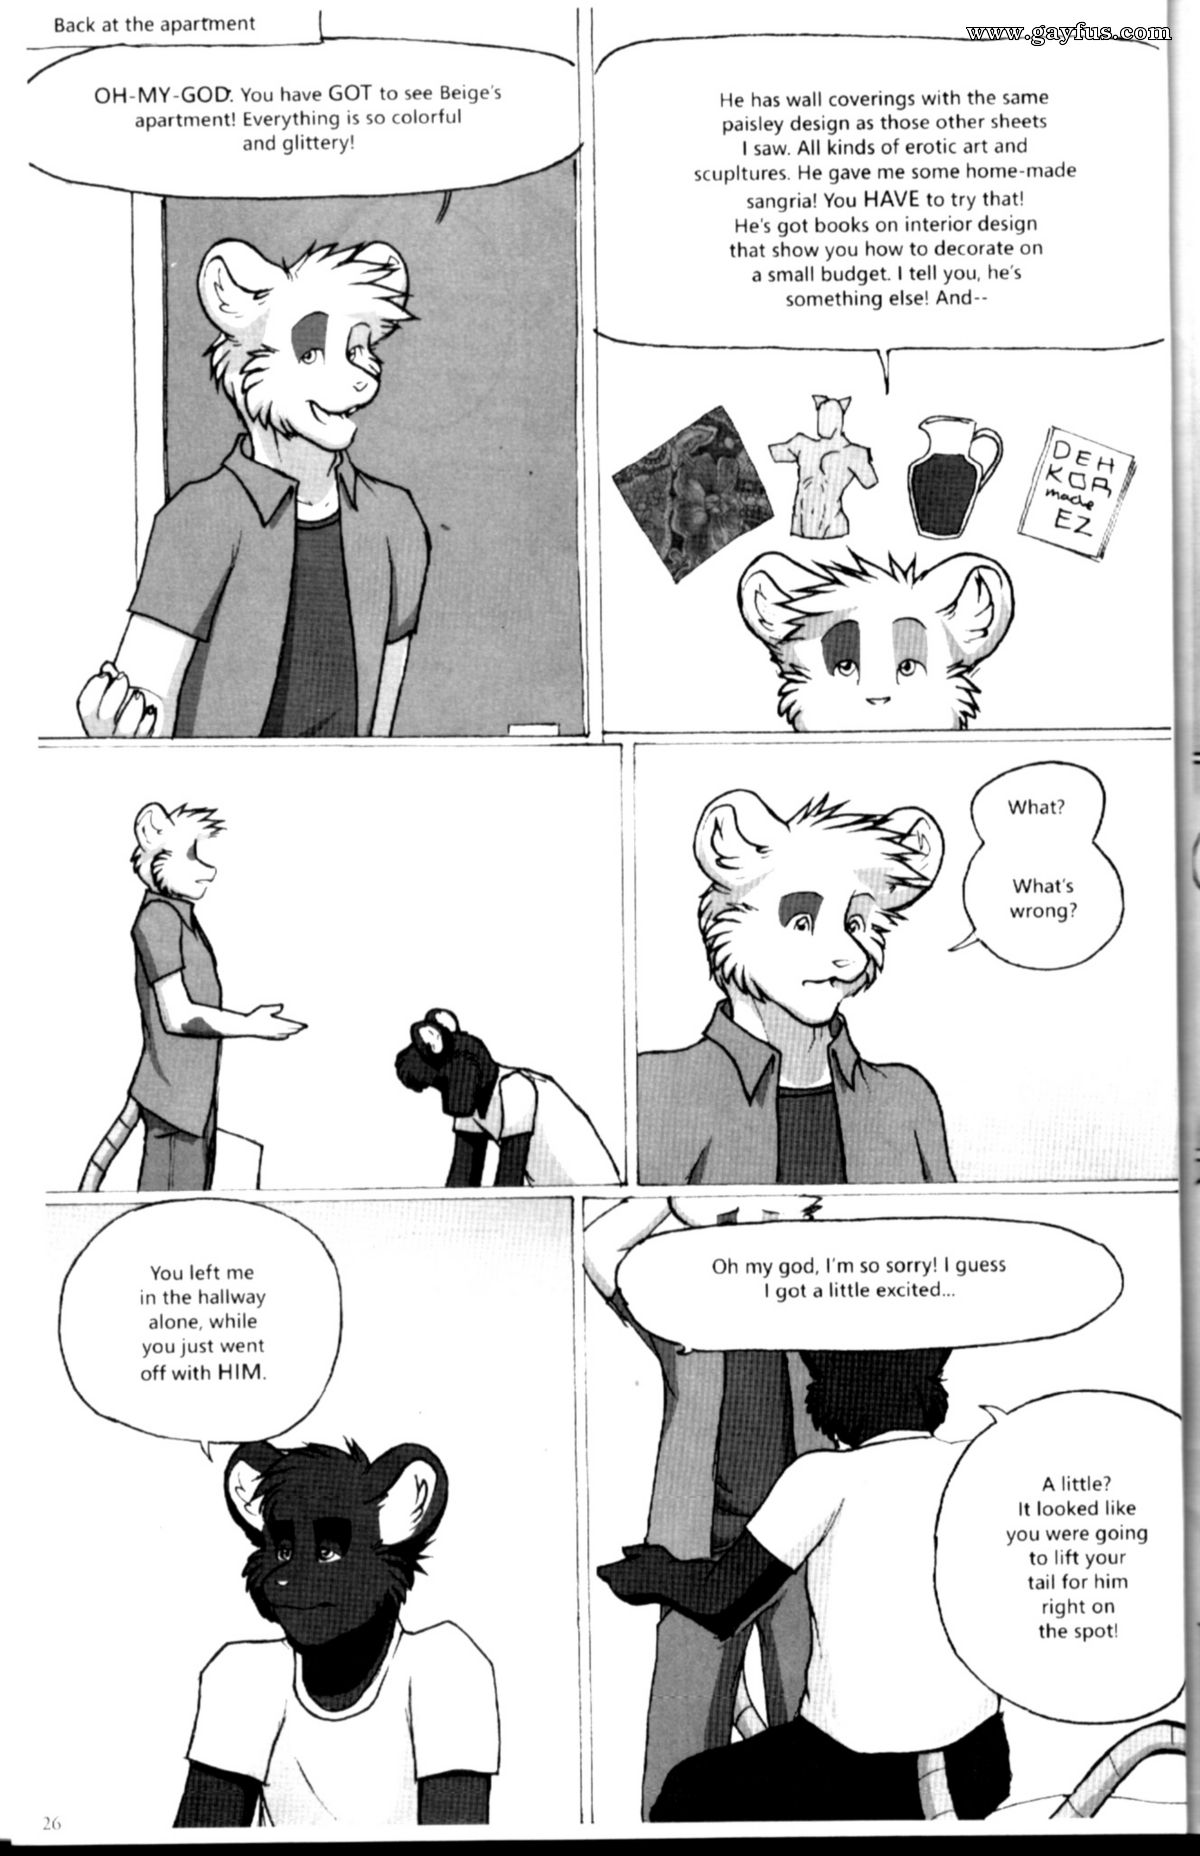 picture MovingIn_Page26.jpg